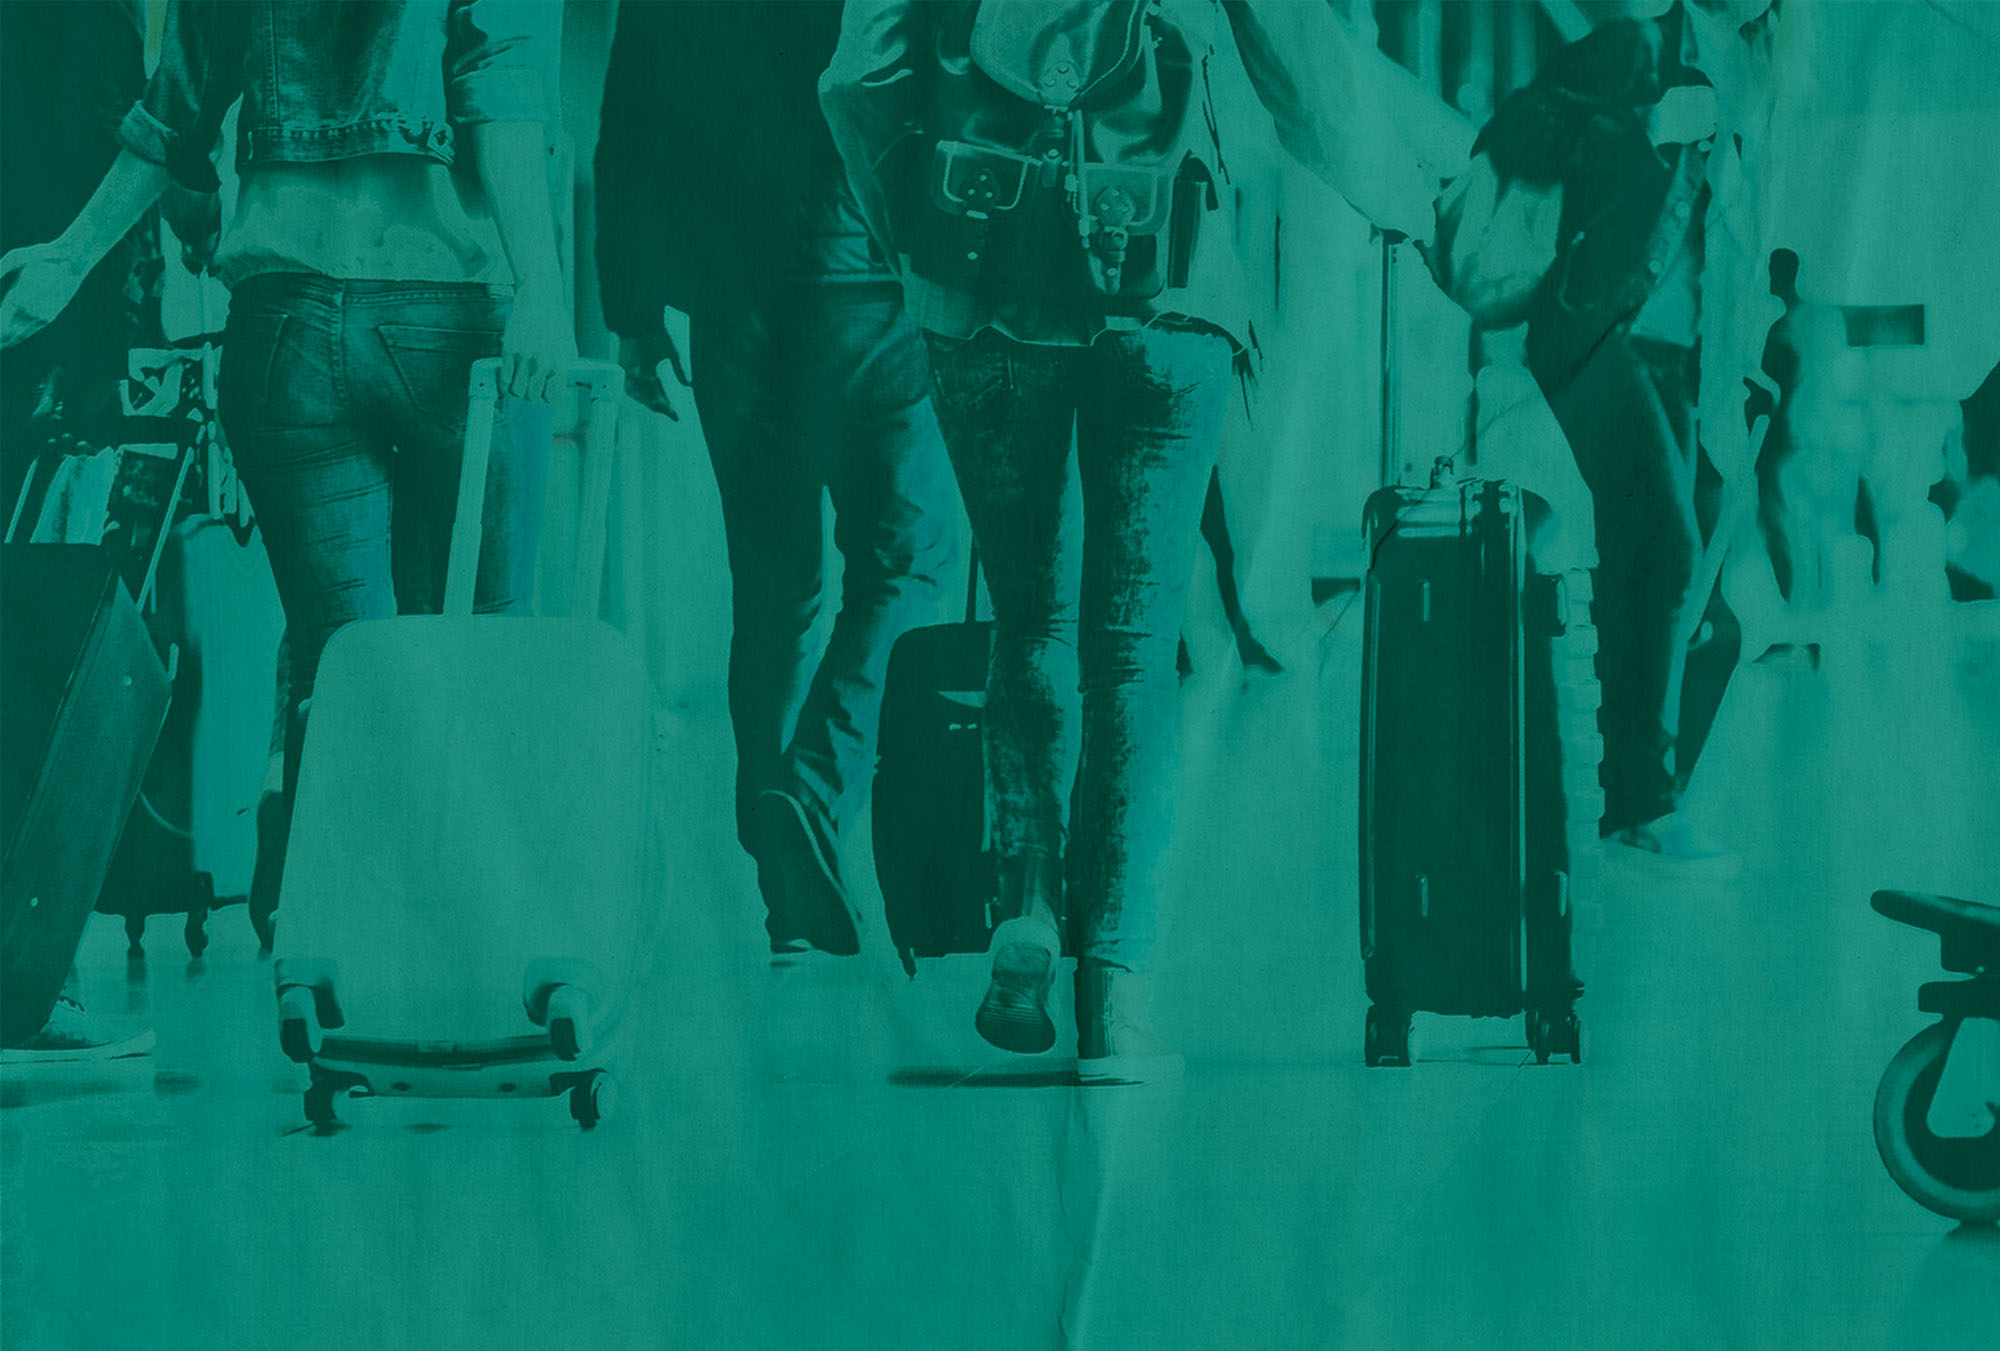 Photo of passengers rolling suitcase as they walk through an airport terminal. The photo has a teal and bad printer effects overlay, which makes the photo look as though it was poorly printed.